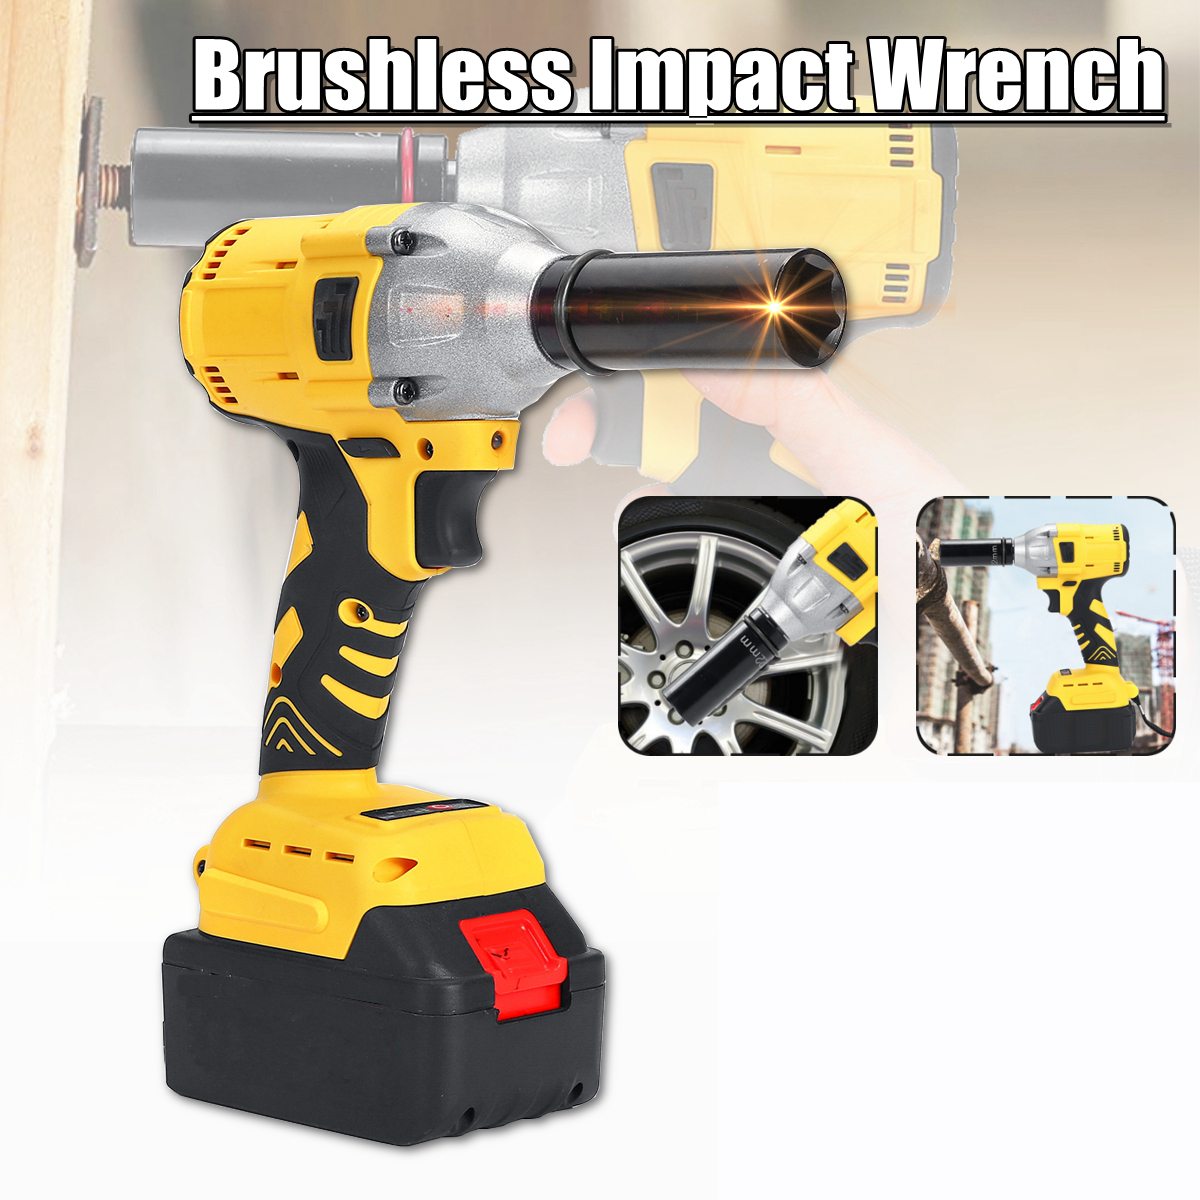 12-Cordless-Brushless-Impact-Wrench-Brushless-Motor-Power-Driver-Electric-Wrench-with-2-Battery-1807111-4